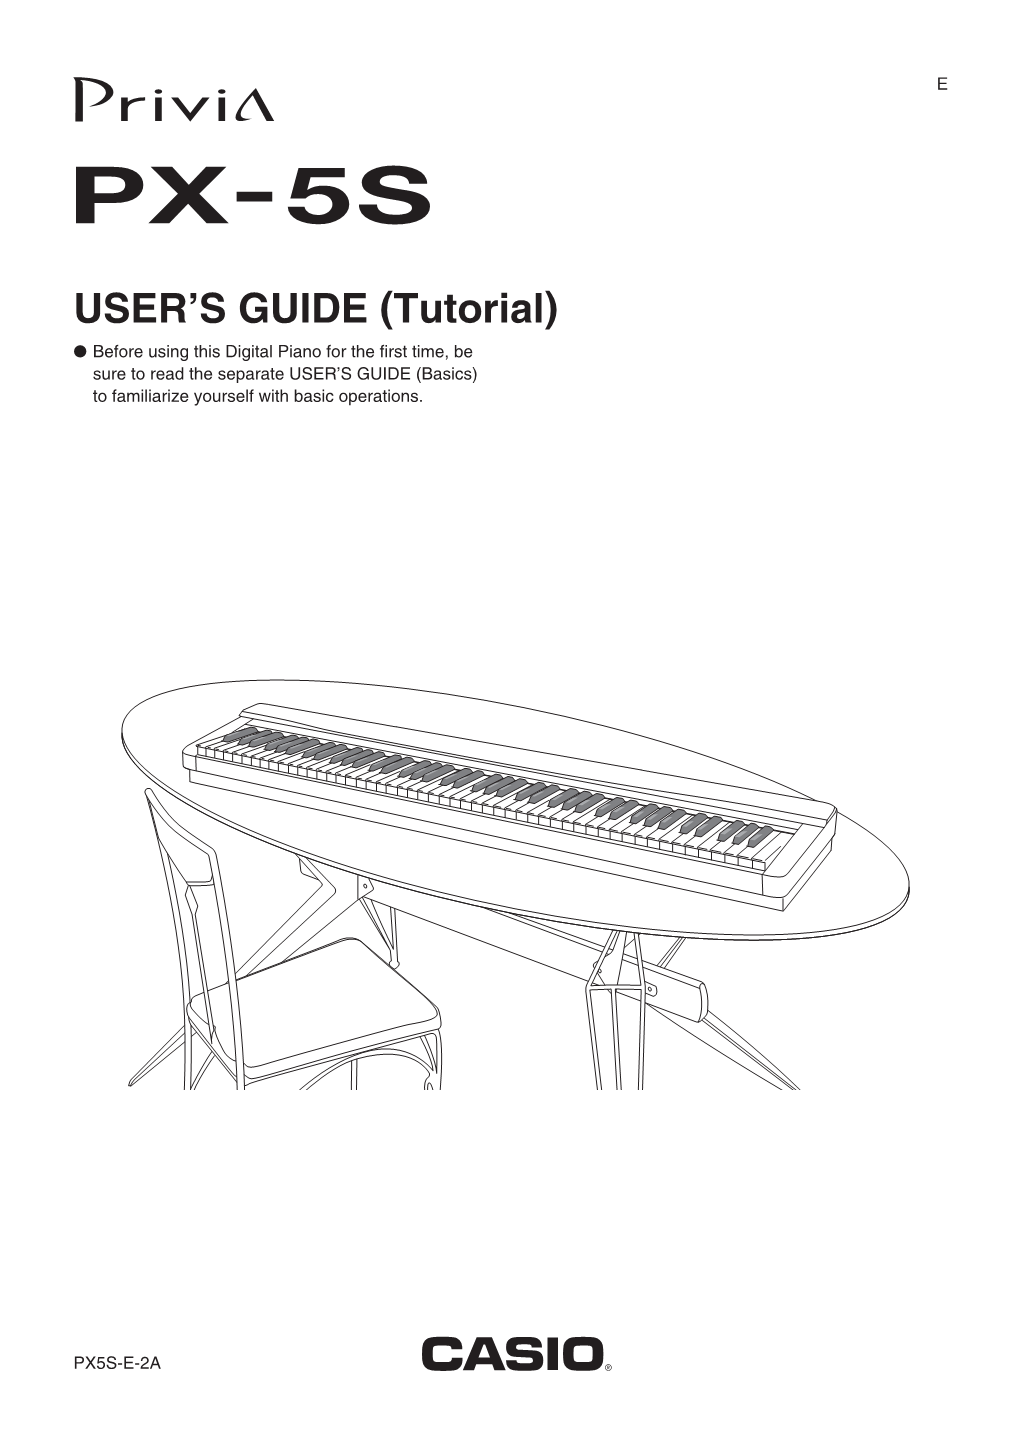 Tutorial) ● Before Using This Digital Piano for the First Time, Be Sure to Read the Separate USER’S GUIDE (Basics) to Familiarize Yourself with Basic Operations